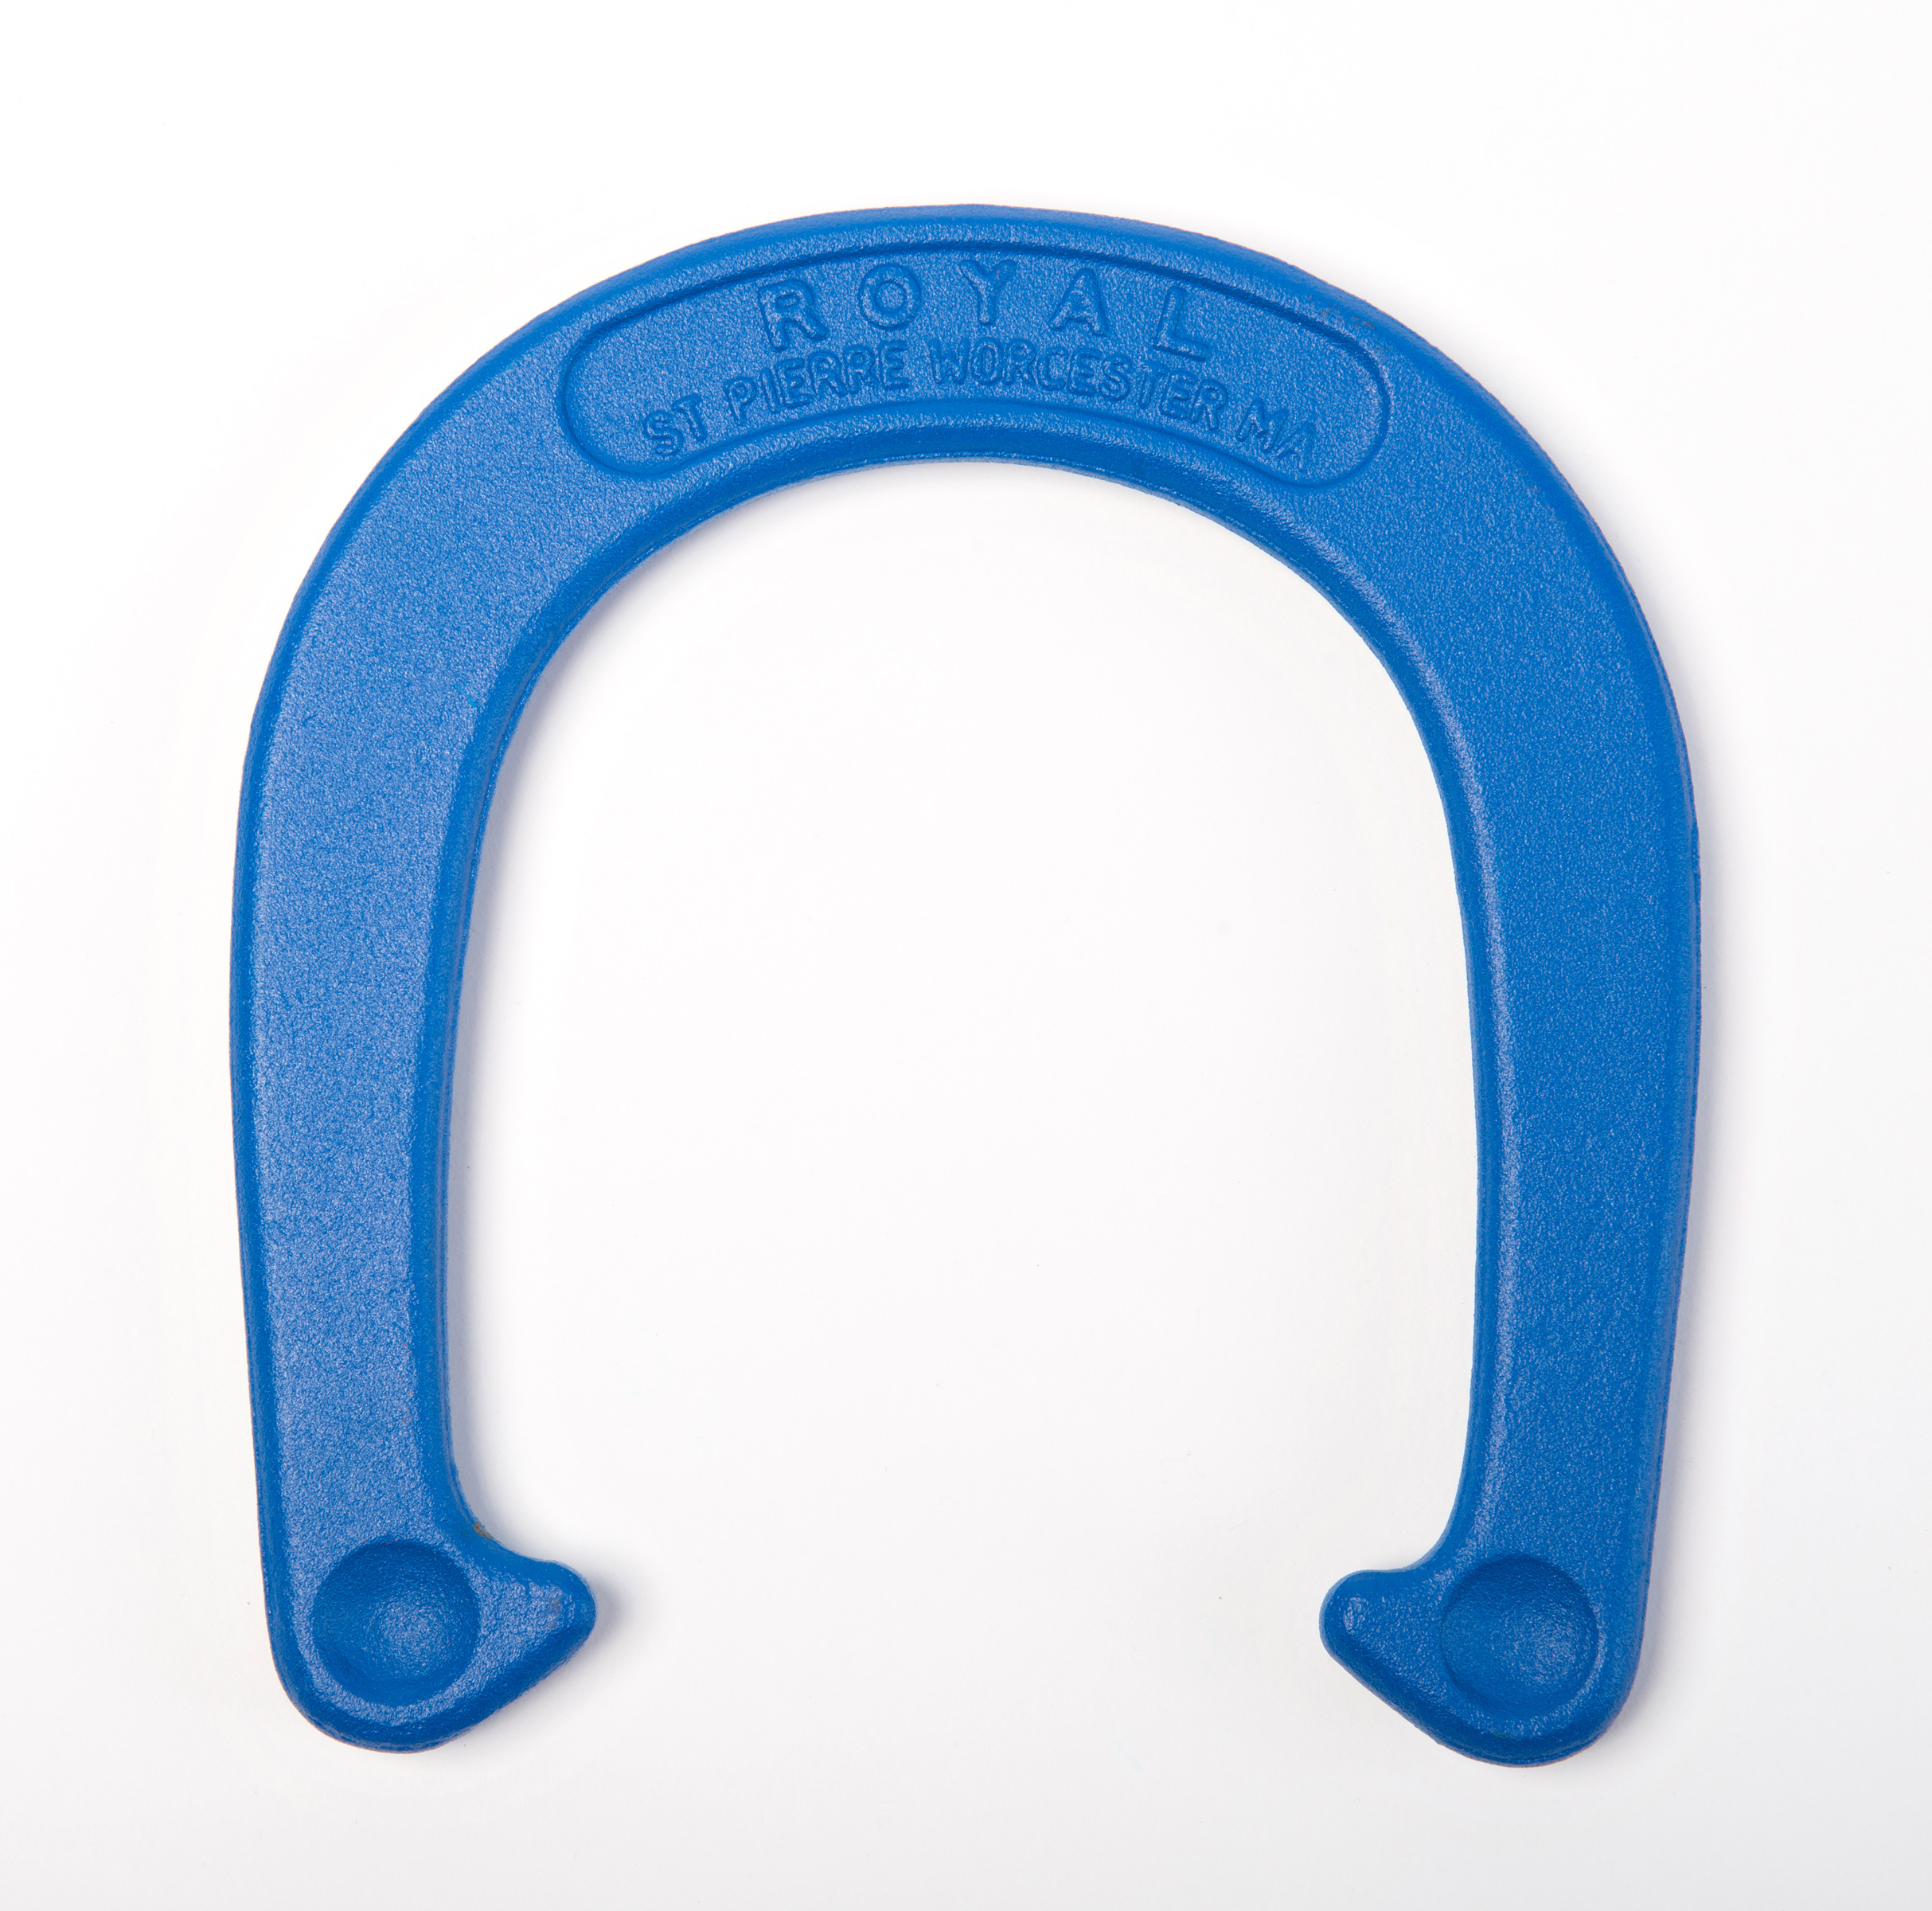 St. Pierre Royal Classic Horseshoe Pair (2 blue horseshoes) by St.Pierre - Made in USA